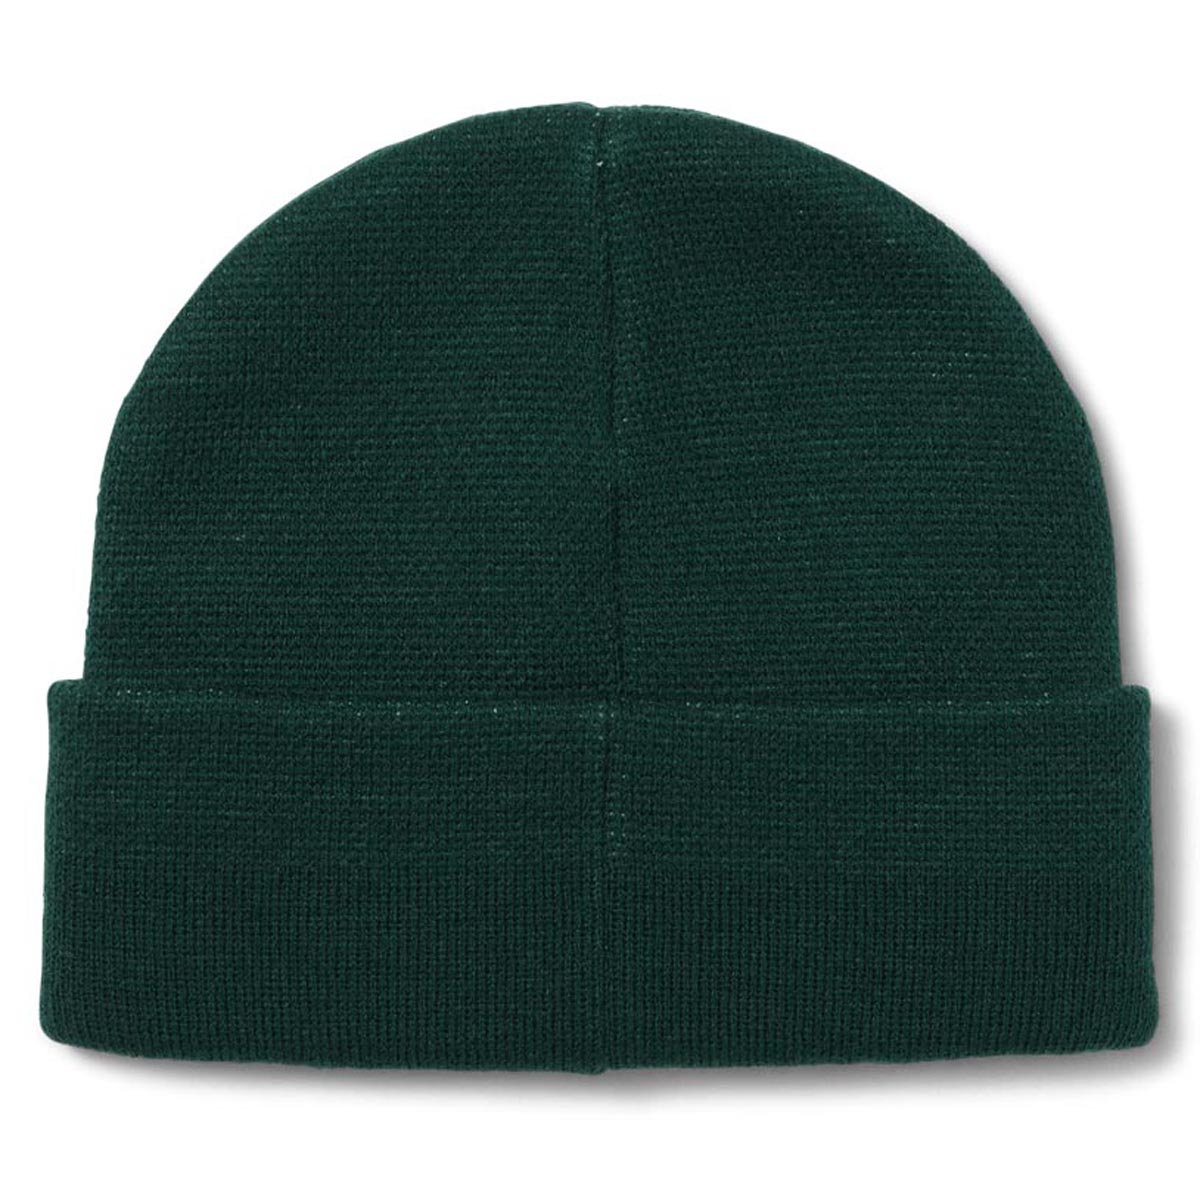 HUF Impact Beanie - Forest Green image 2